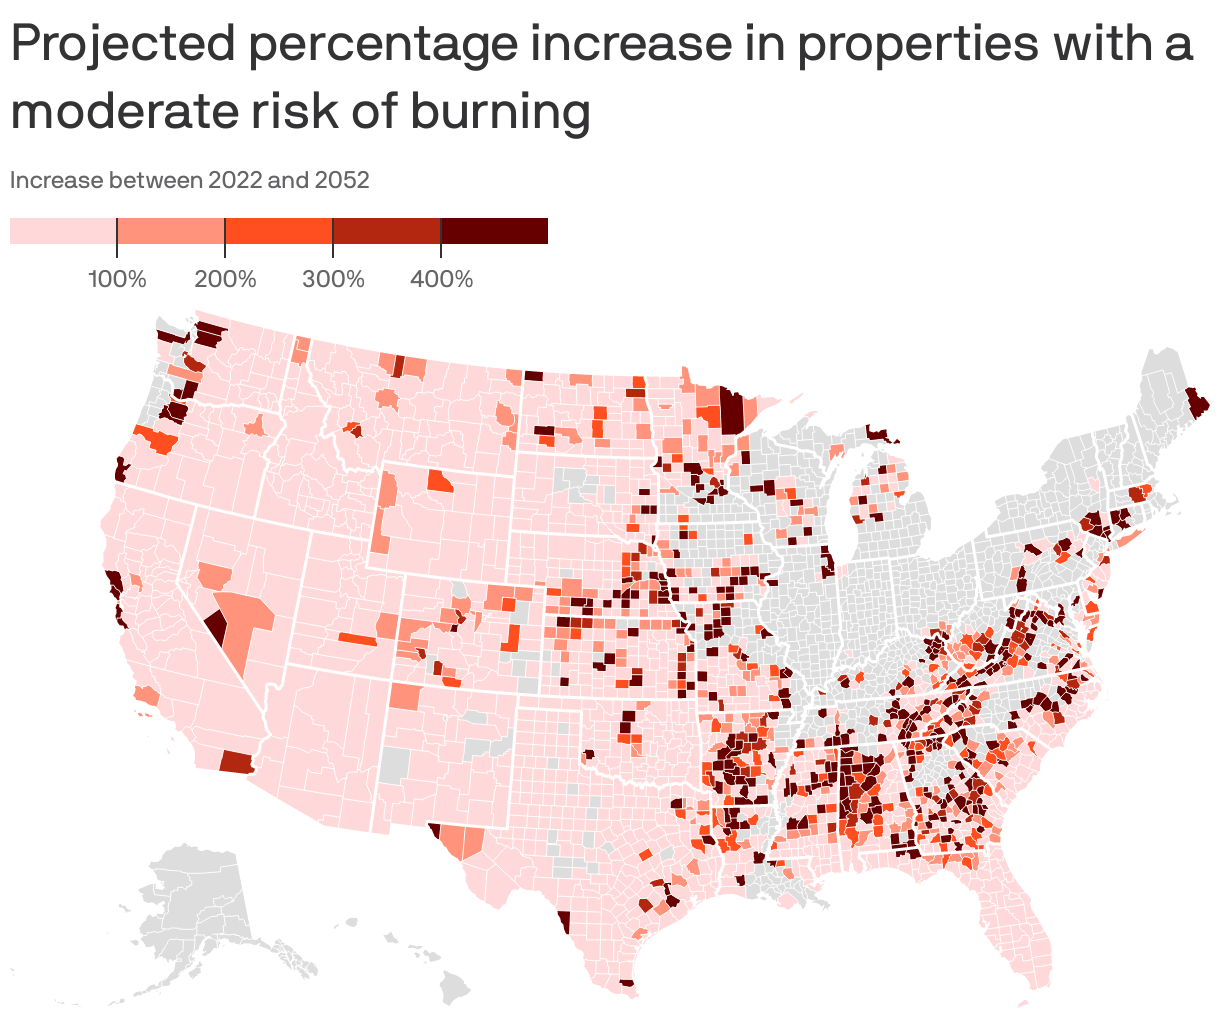 Projected percentage increase in properties with a moderate risk of burning